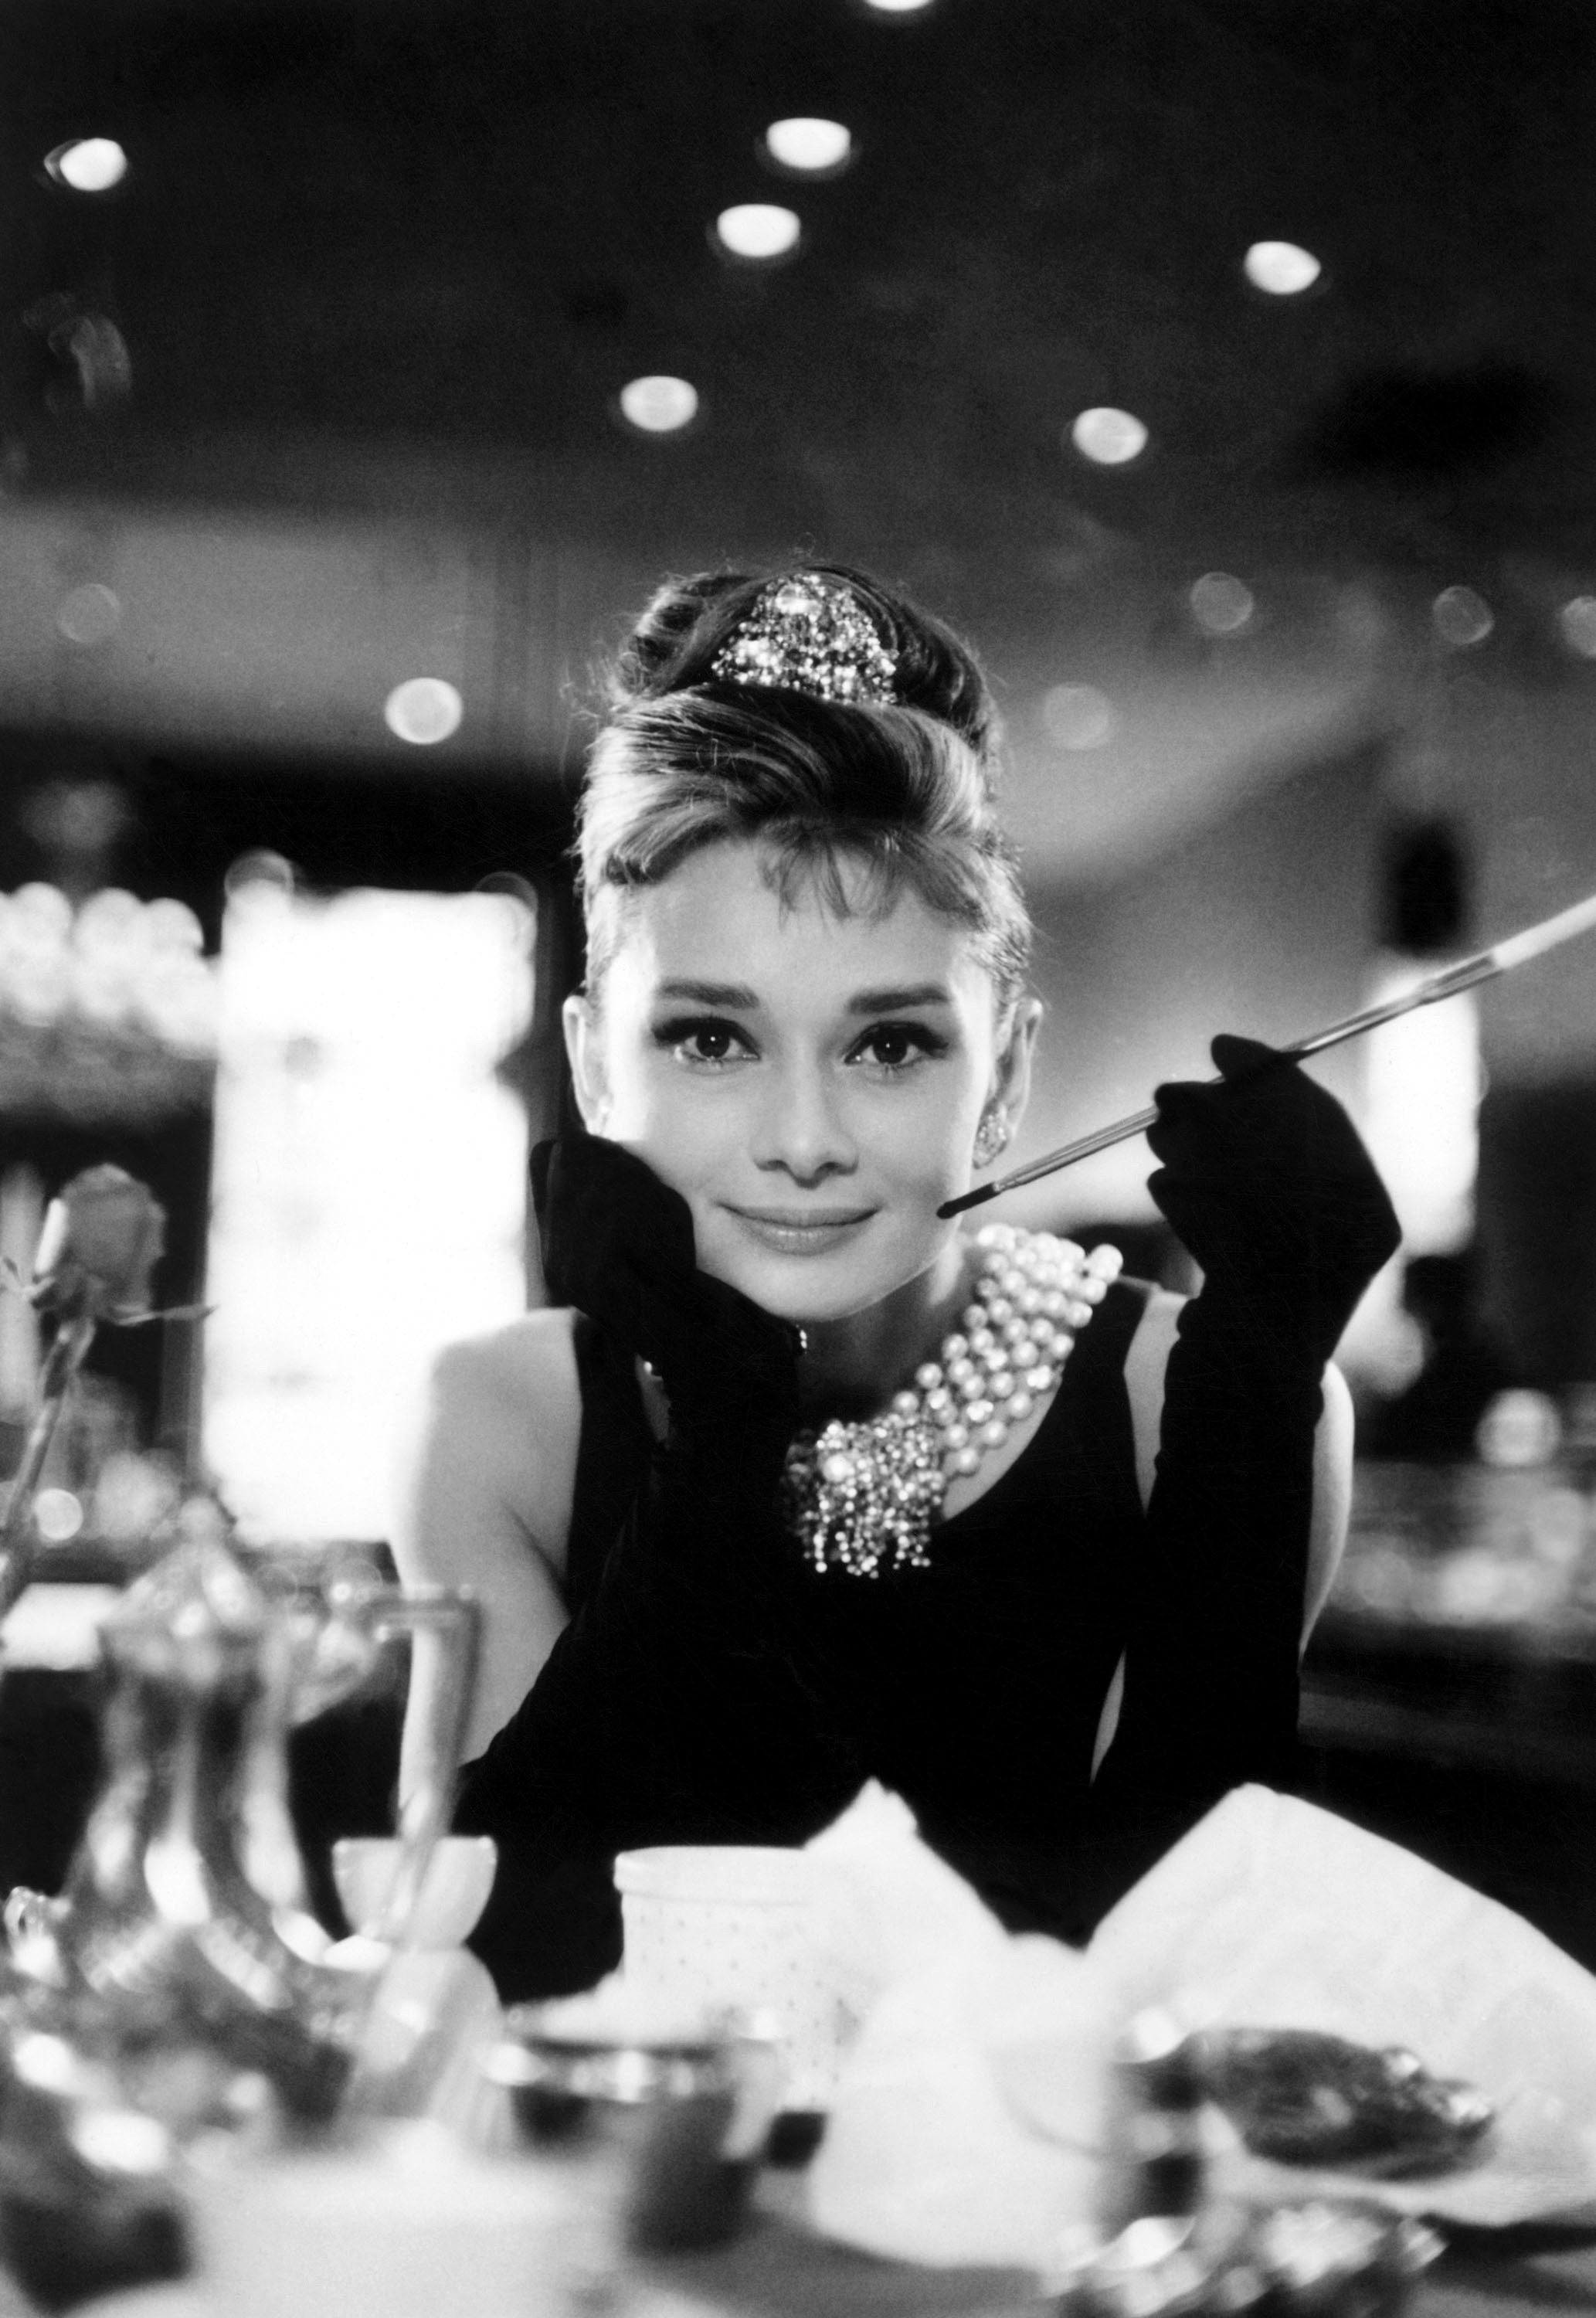 Breakfast at Tiffany's shares a name with the novella that inspired the adaptation — and the film easily could have starred Marilyn Monroe, who author Truman Capote rallied for.